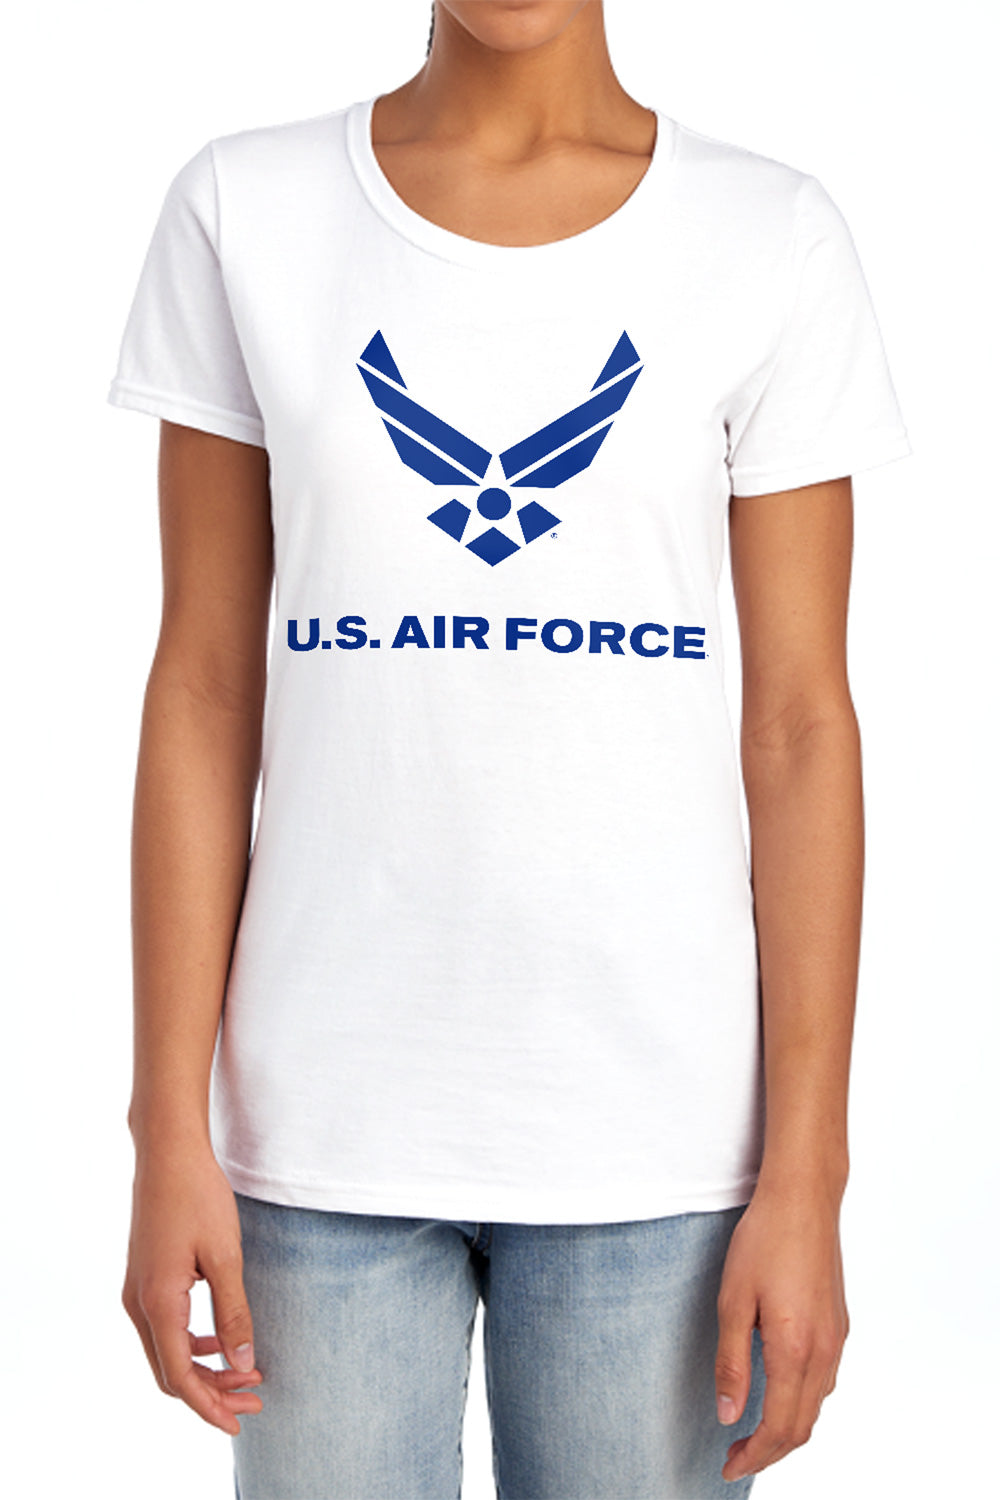 AIR FORCE : DISTRESSED LOGO S\S WOMENS TEE White LG